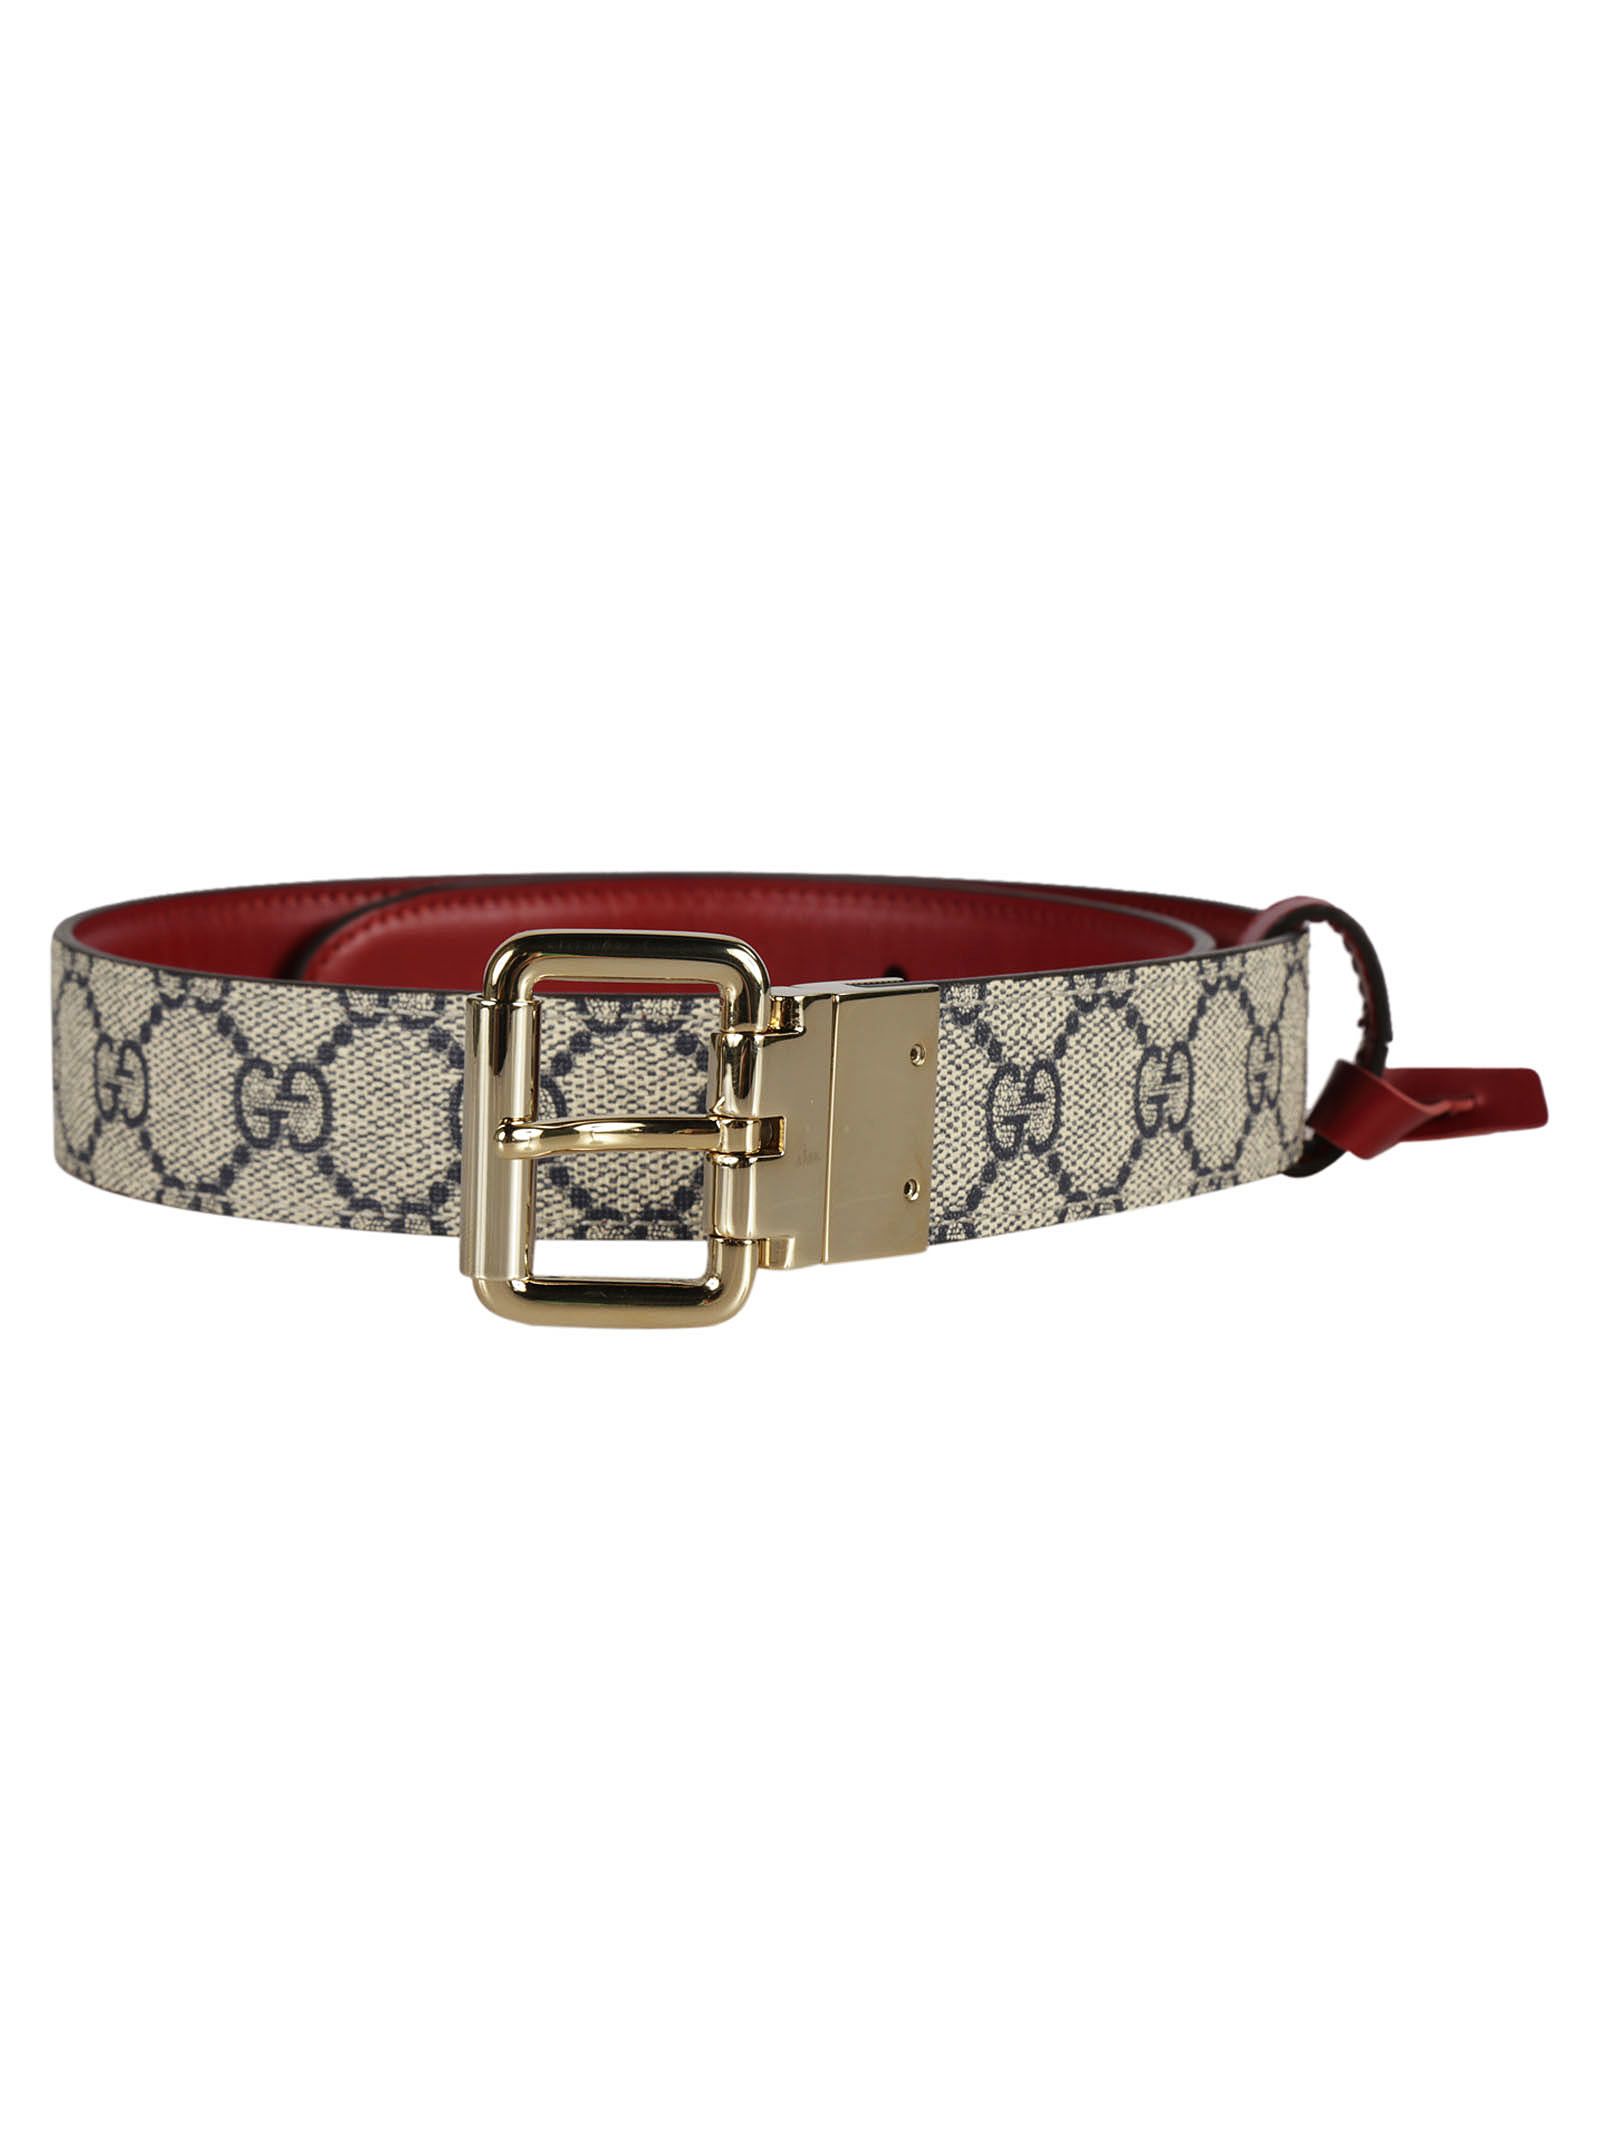 Gucci Gucci Reversible Leather and GG Supreme Belt - Beige/Red - 6303801 | italist